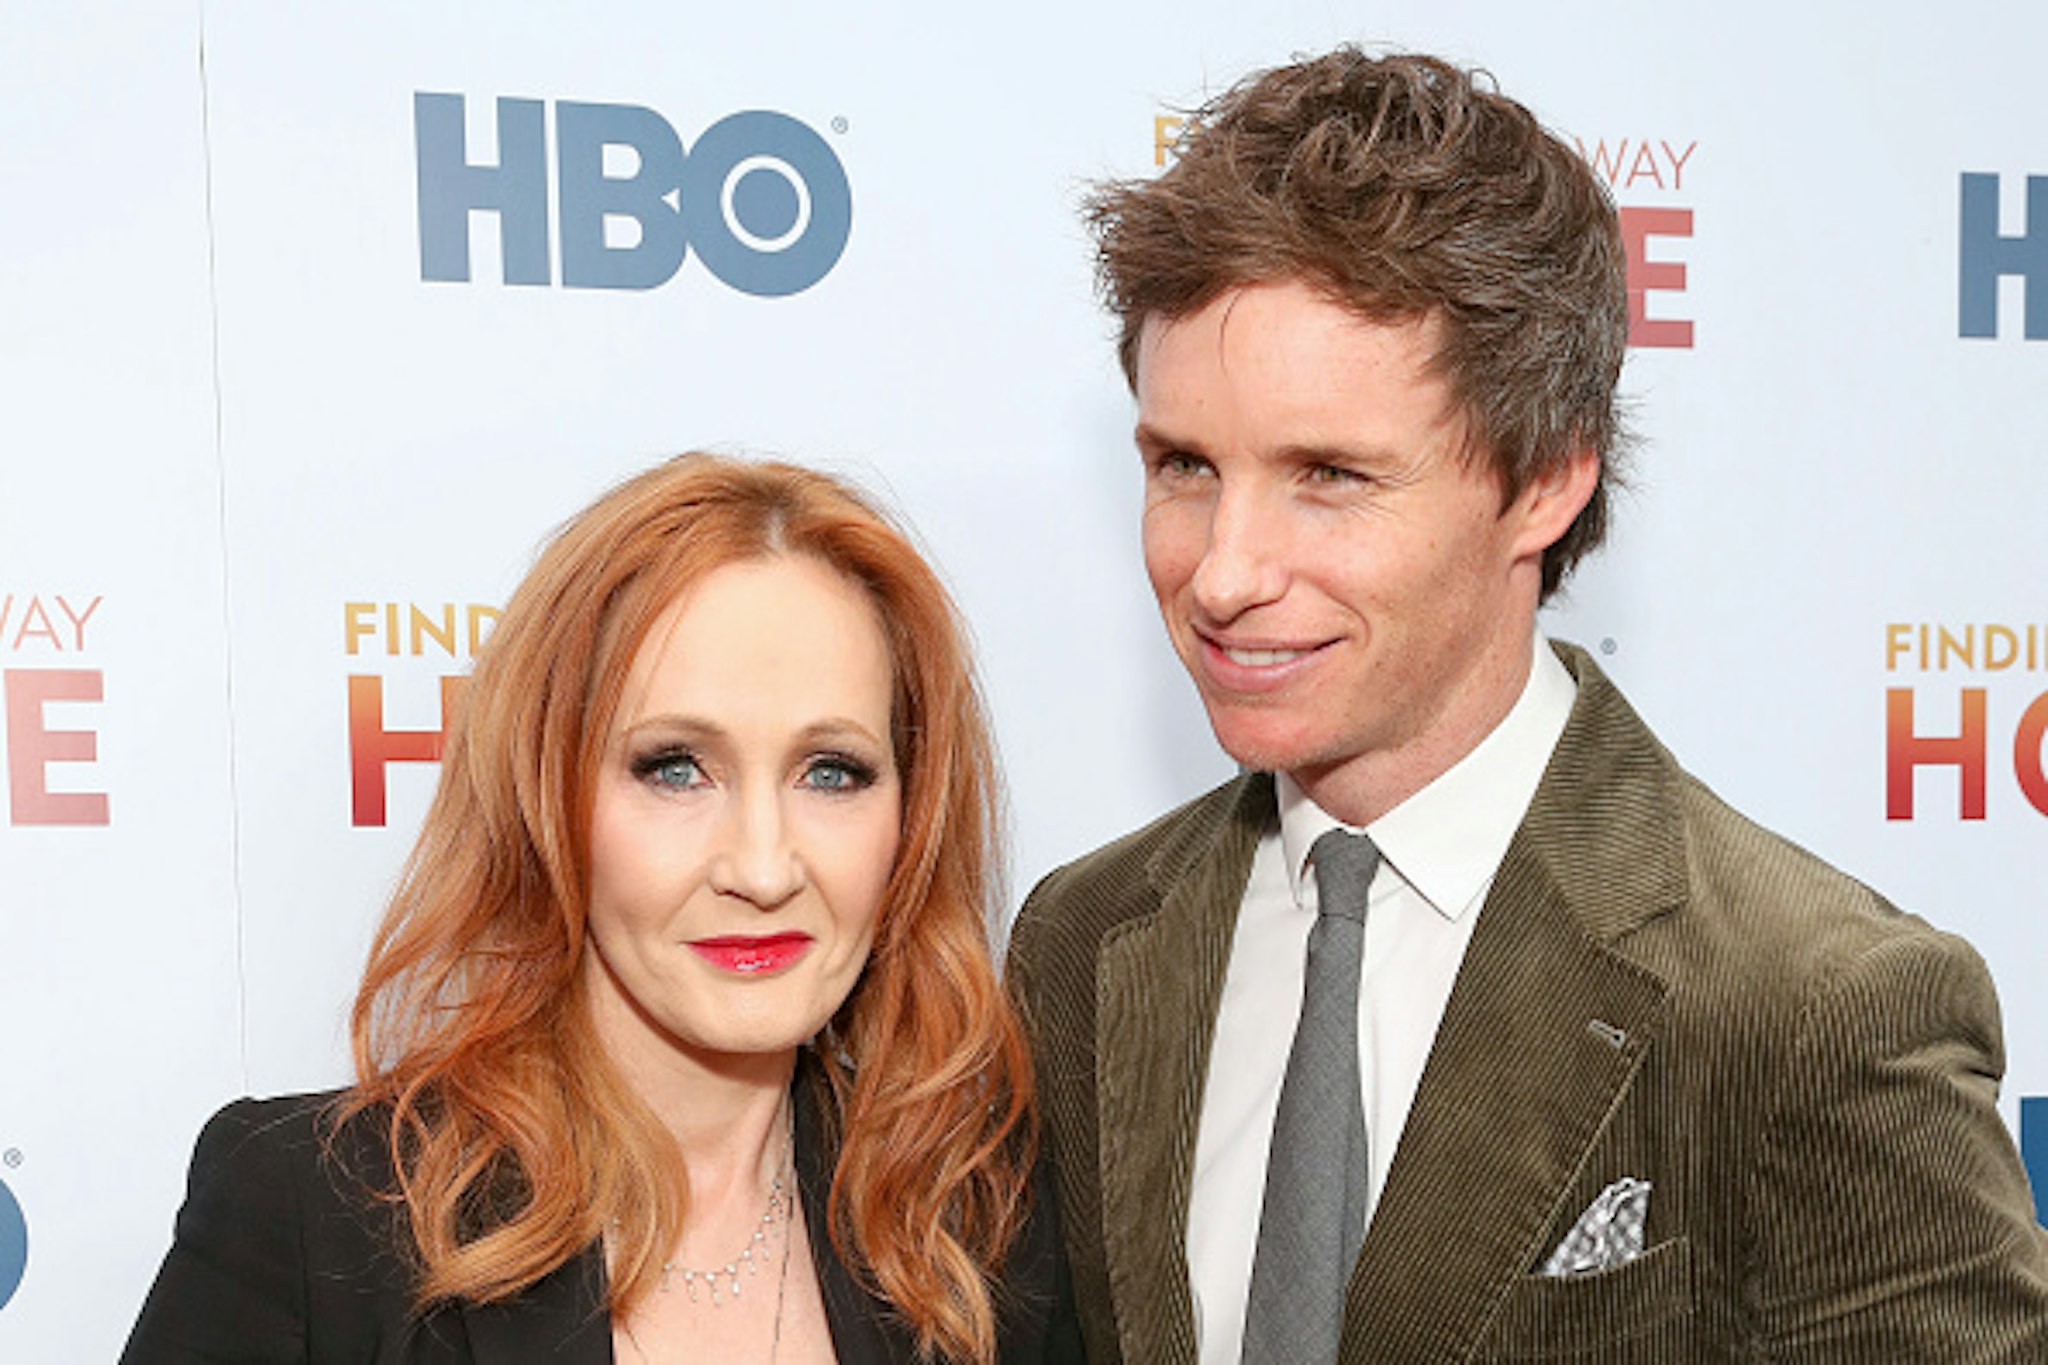 NEW YORK, NEW YORK - DECEMBER 11: J.K. Rowling and Eddie Redmayne attend HBO's "Finding The Way Home" World Premiere at Hudson Yards on December 11, 2019 in New York City.